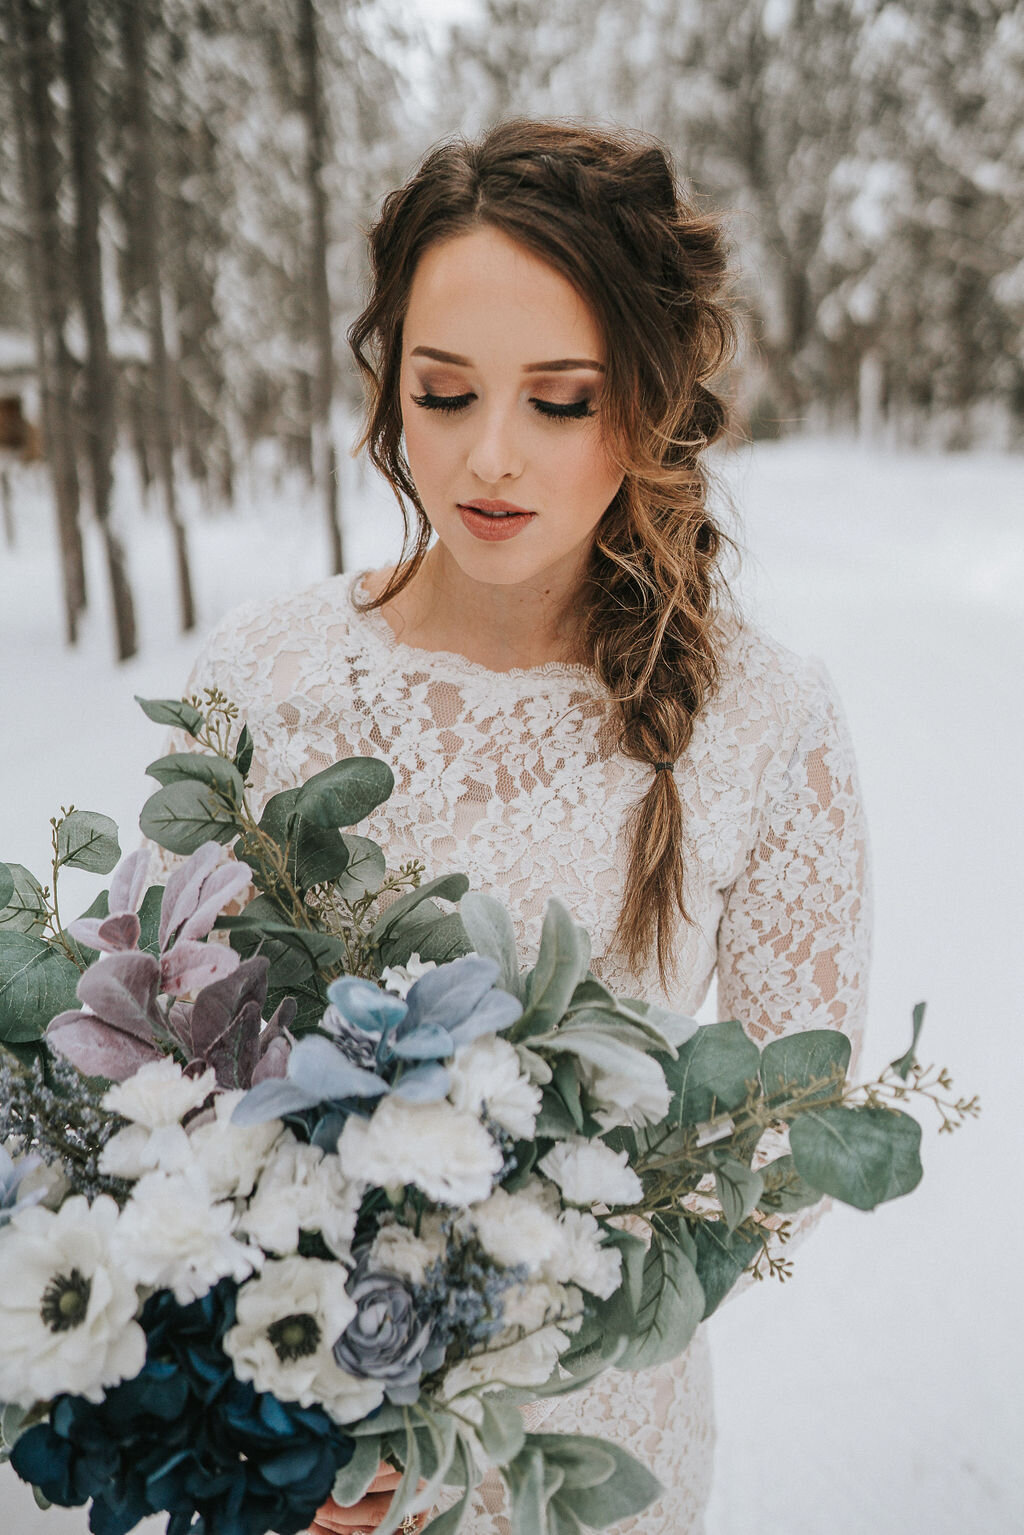 effortless-whimsical-natural-fishtail-braid-bridal-hairstyles-wedding-trend-2020-look-for-the-light-photo-video